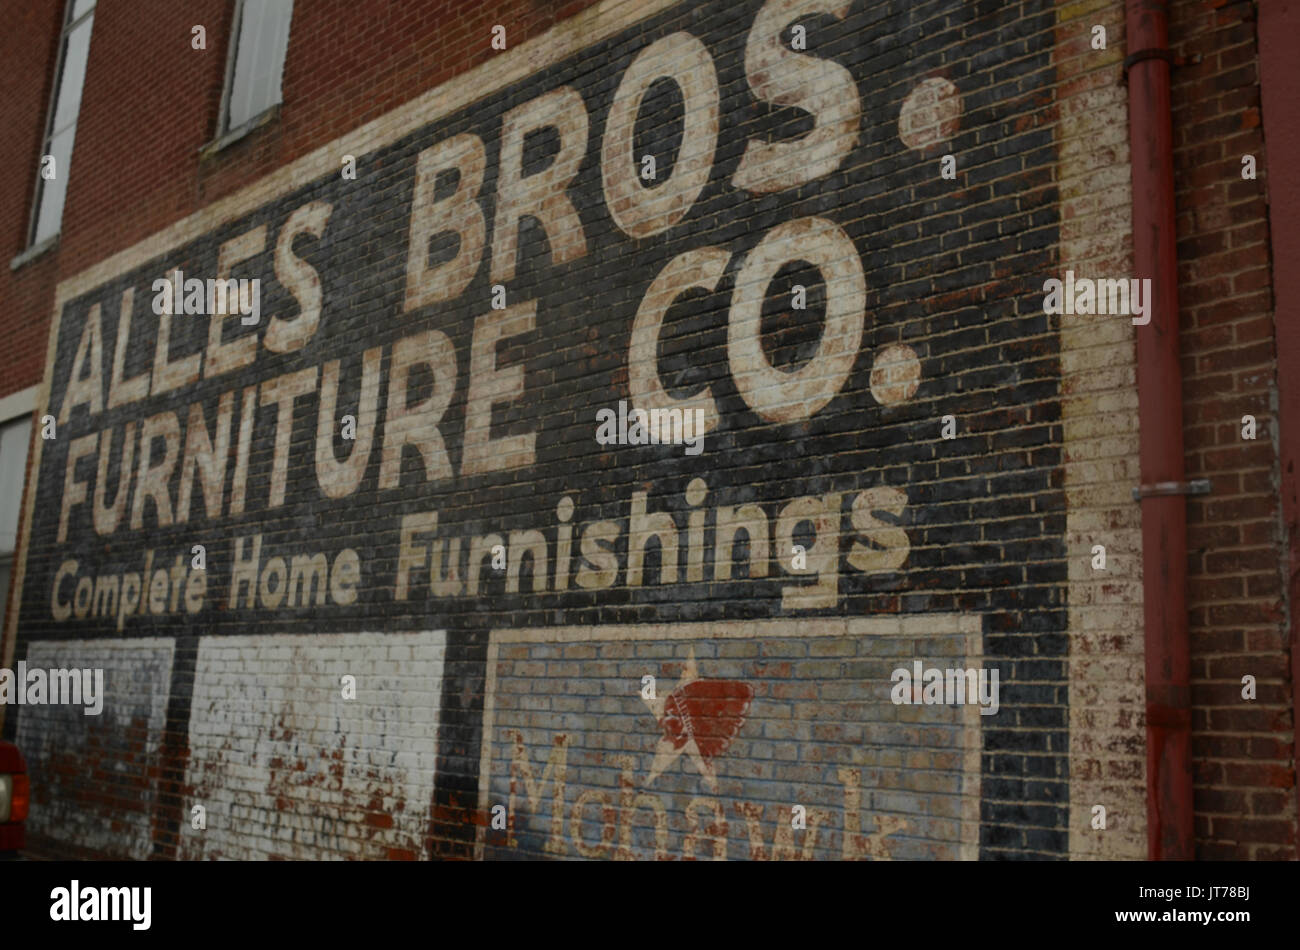 Vintage Painted Sign On Old Brick Building Stock Photo 152594950